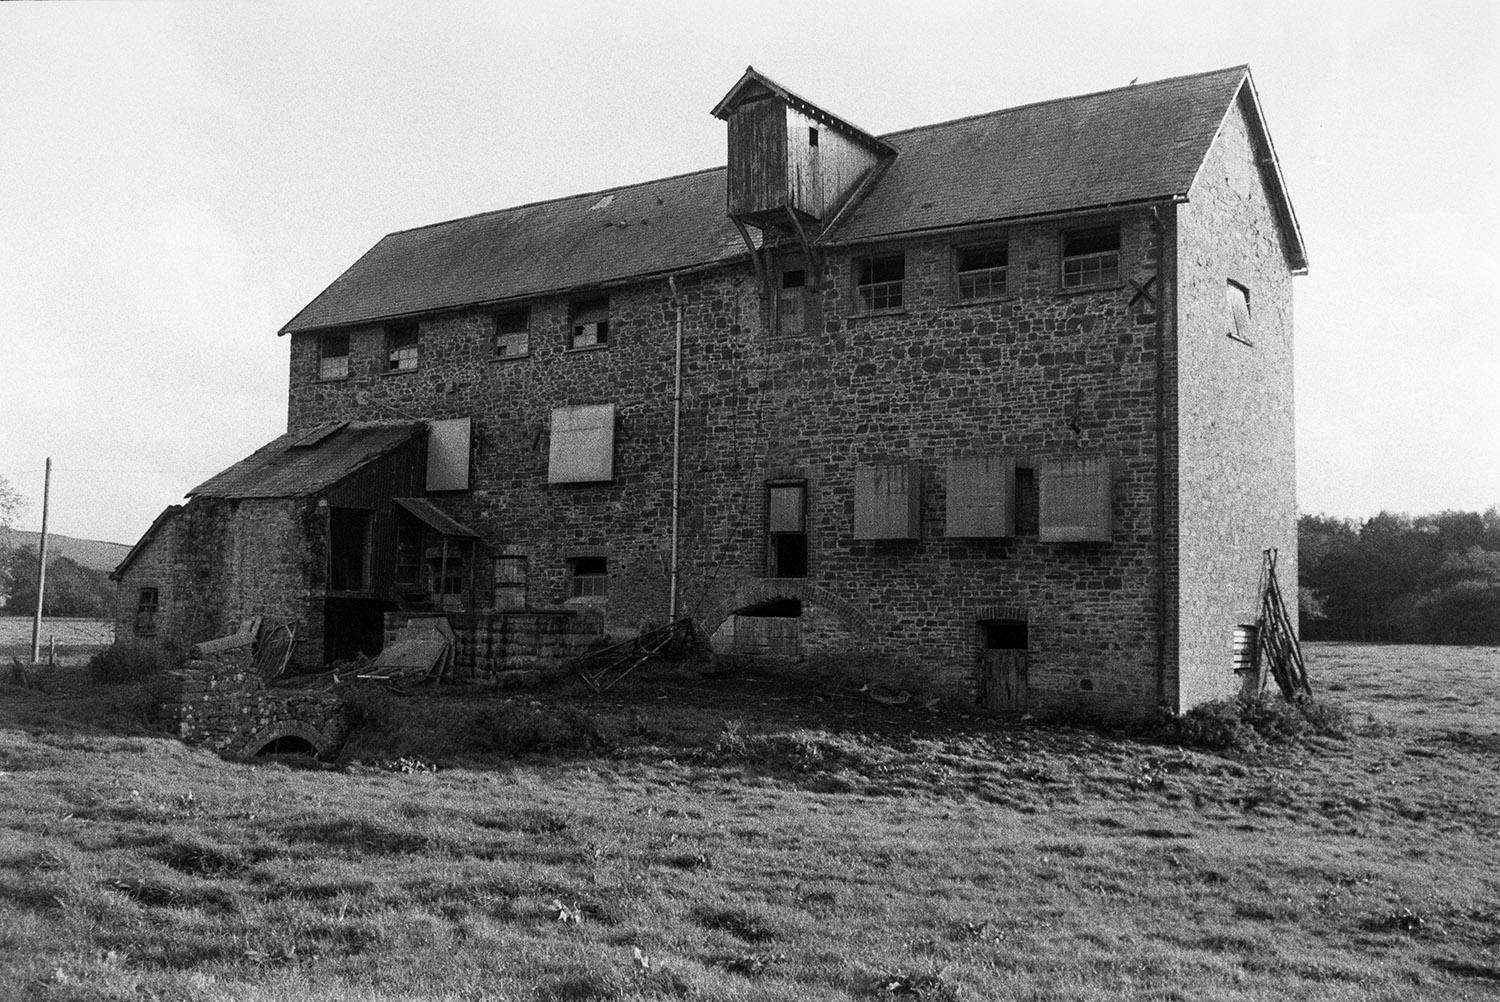 A stone mill building at Weare Giffard, with tress in the background.